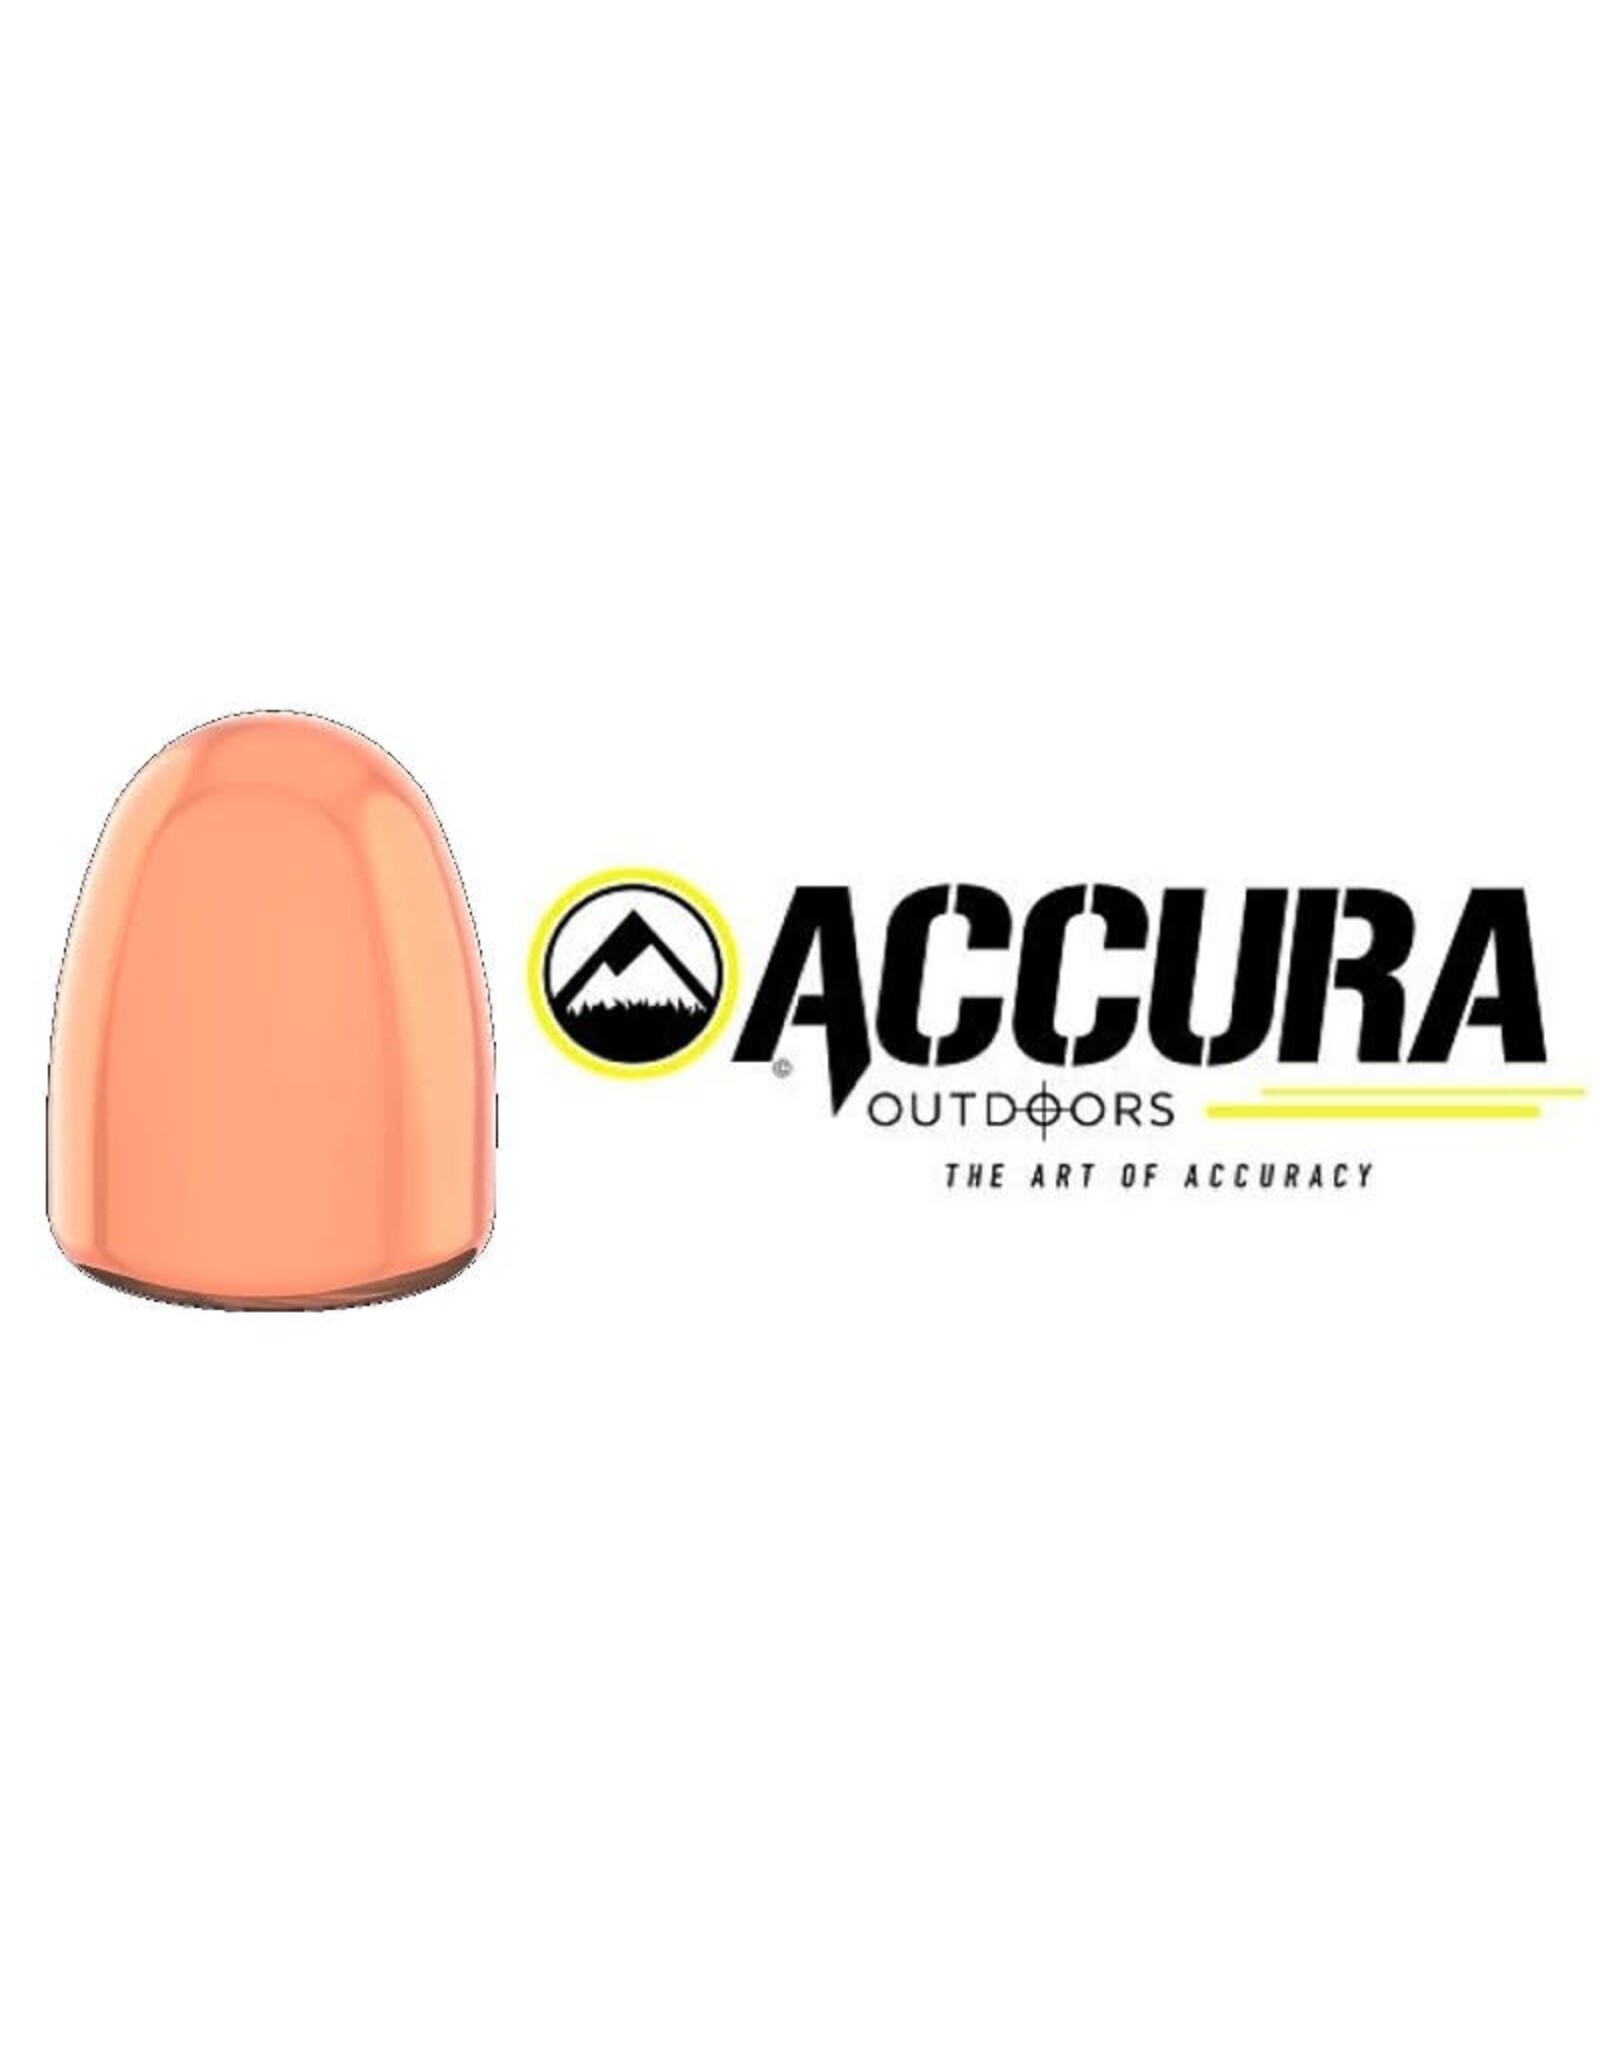 Accura Accura Bullets .45 Cal 200 GR  Round Nose (.452") - 500 Count